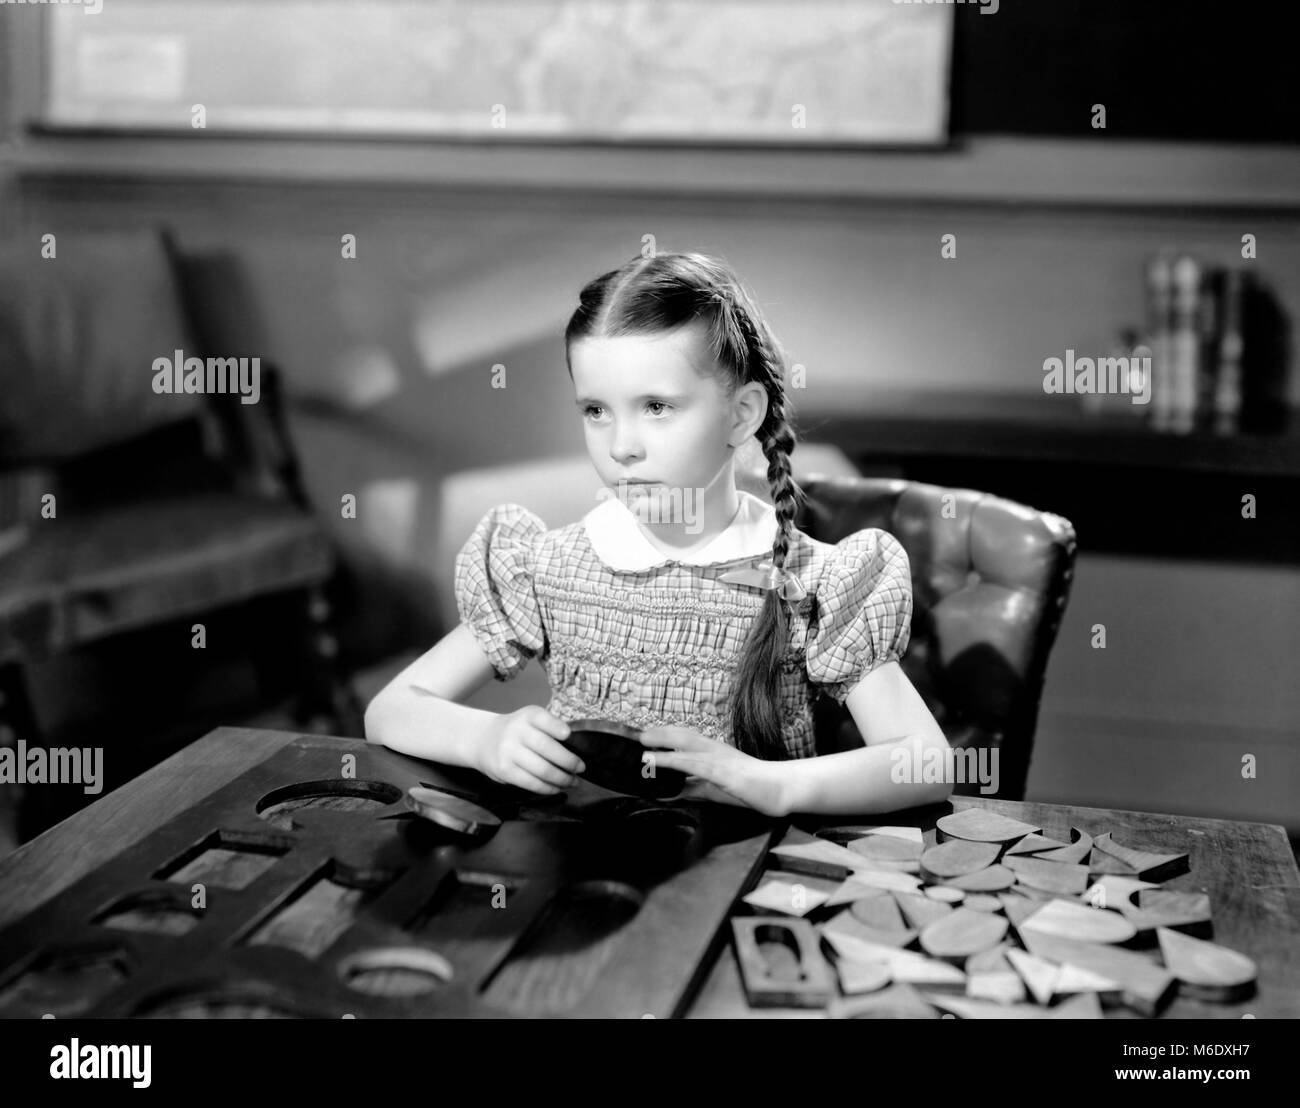 LOST ANGEL 1943 MGM film with Margaret O'Brien Stock Photo